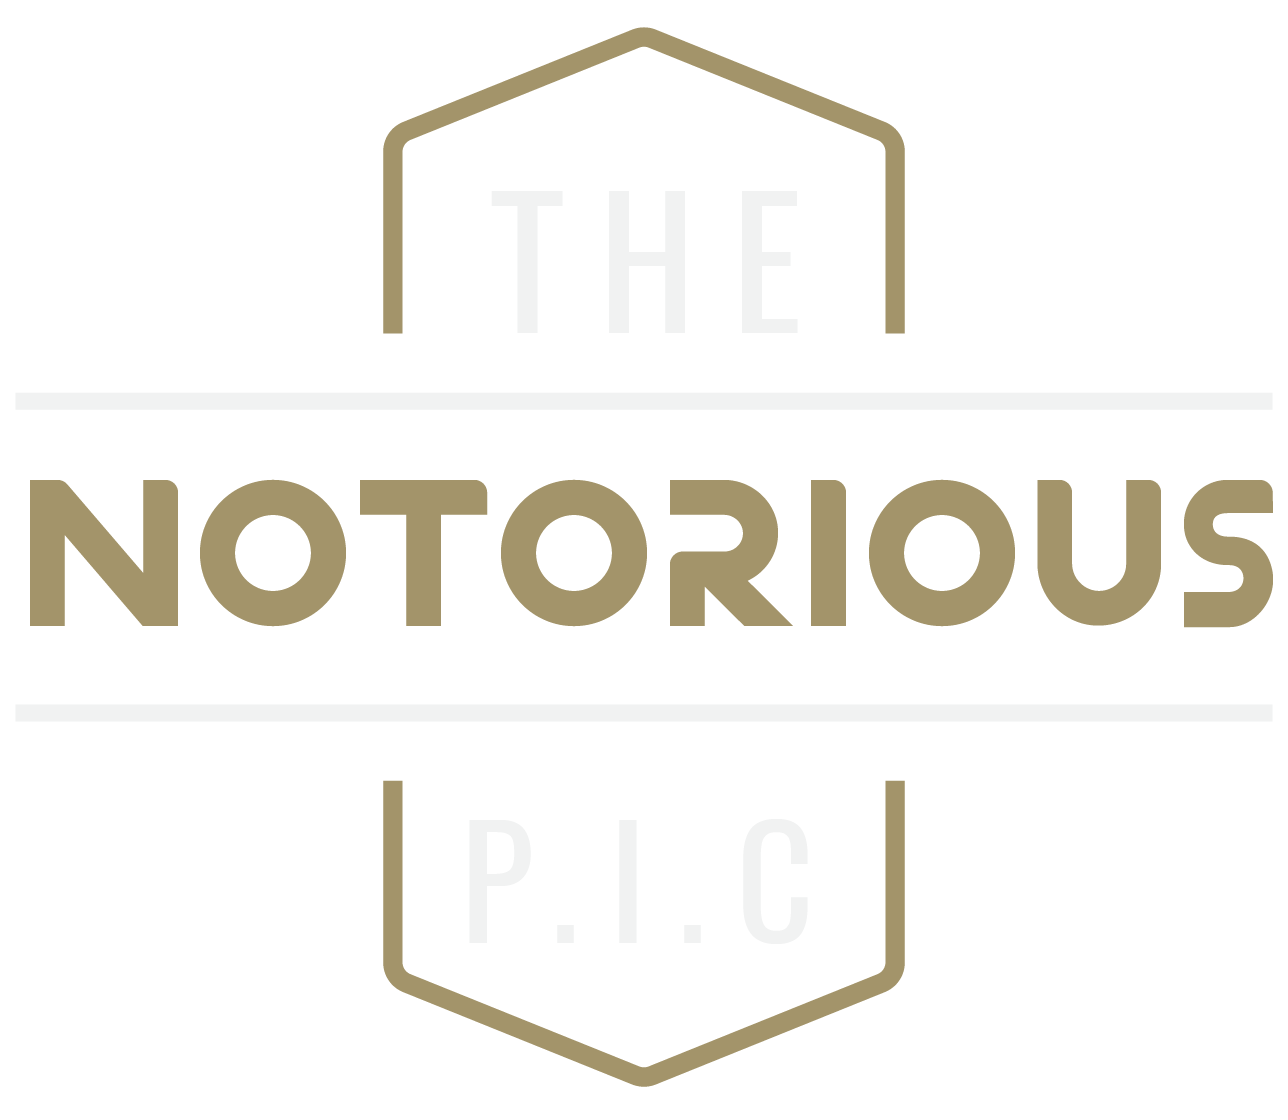 The Notorious P.I.C